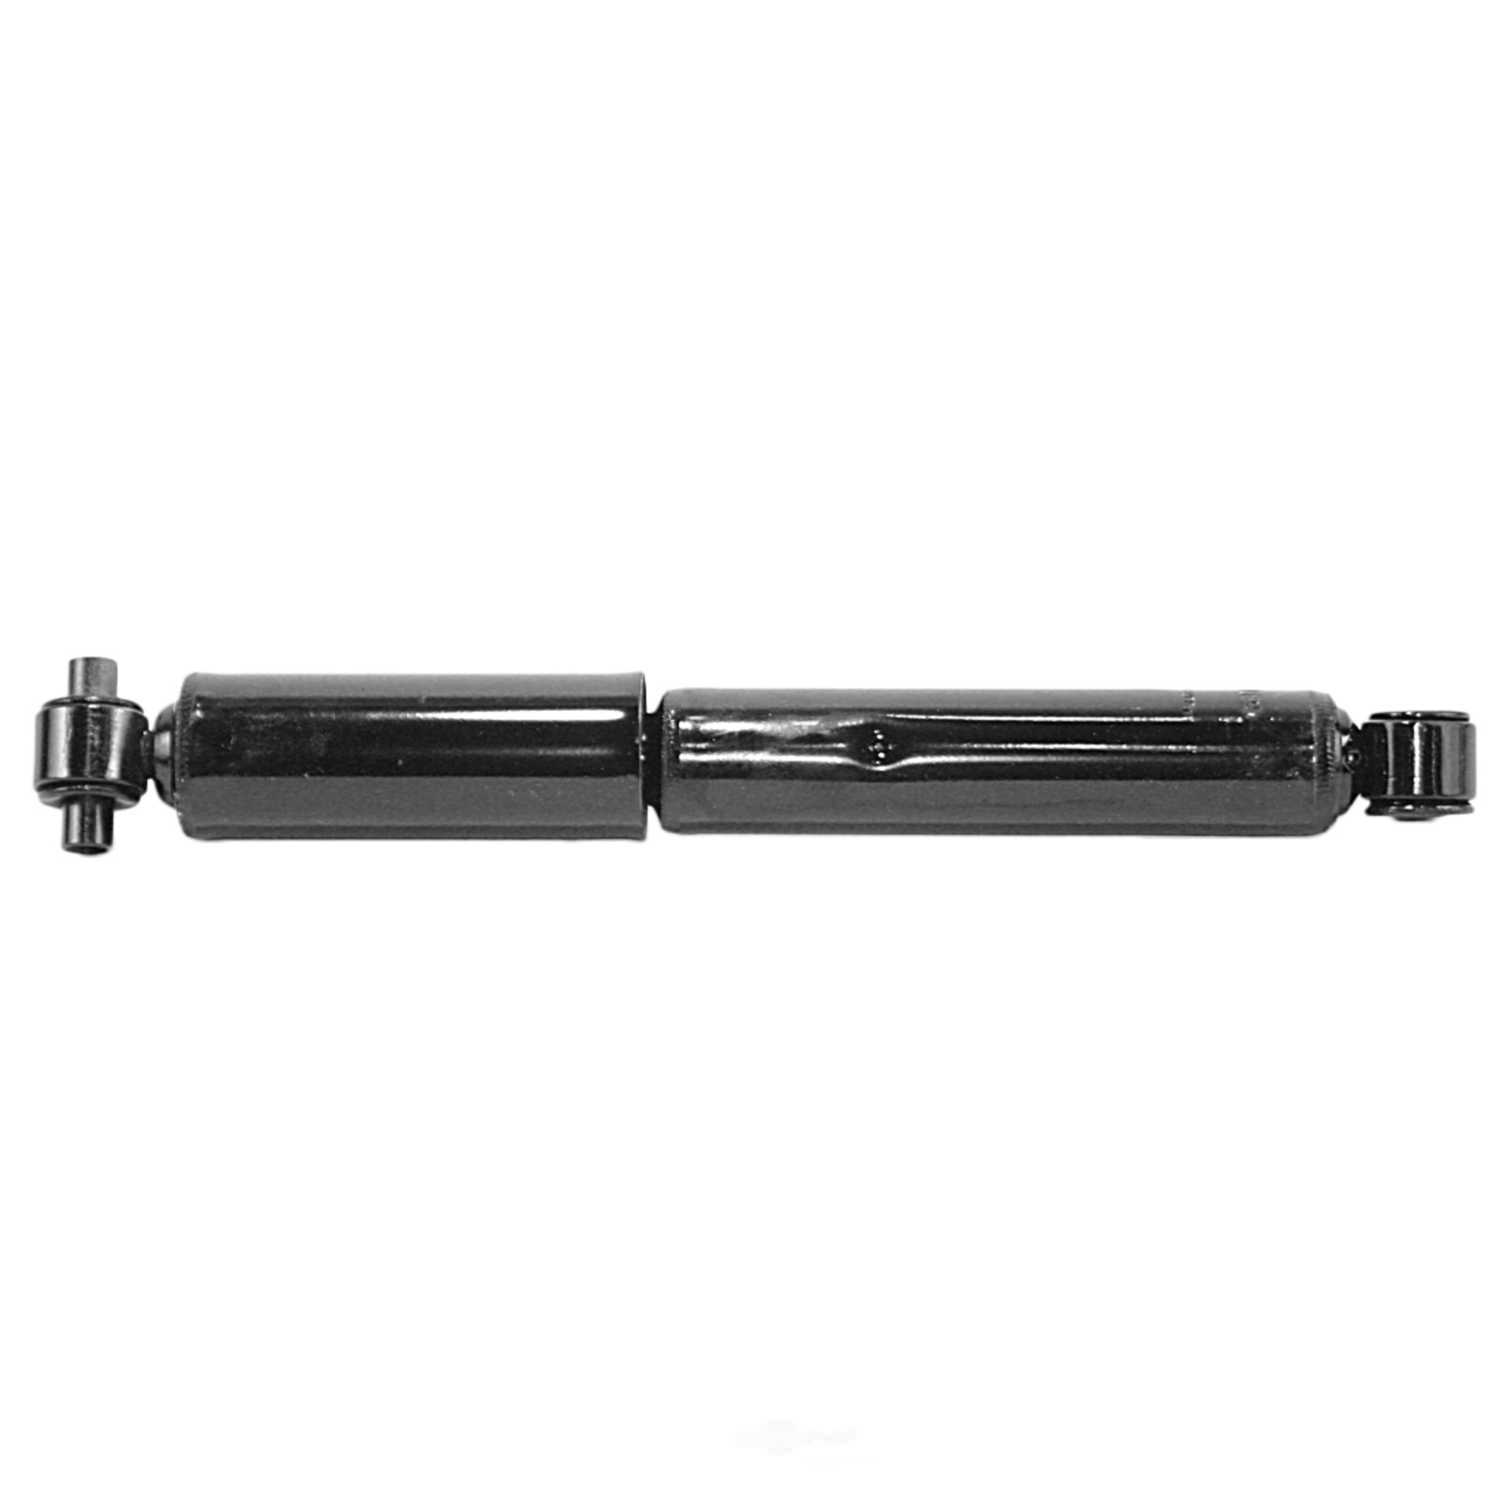 Shock Absorber fits 1979-1991 Plymouth Colt Champ  CANADIAN TIRE MONROE SHOCKS/S